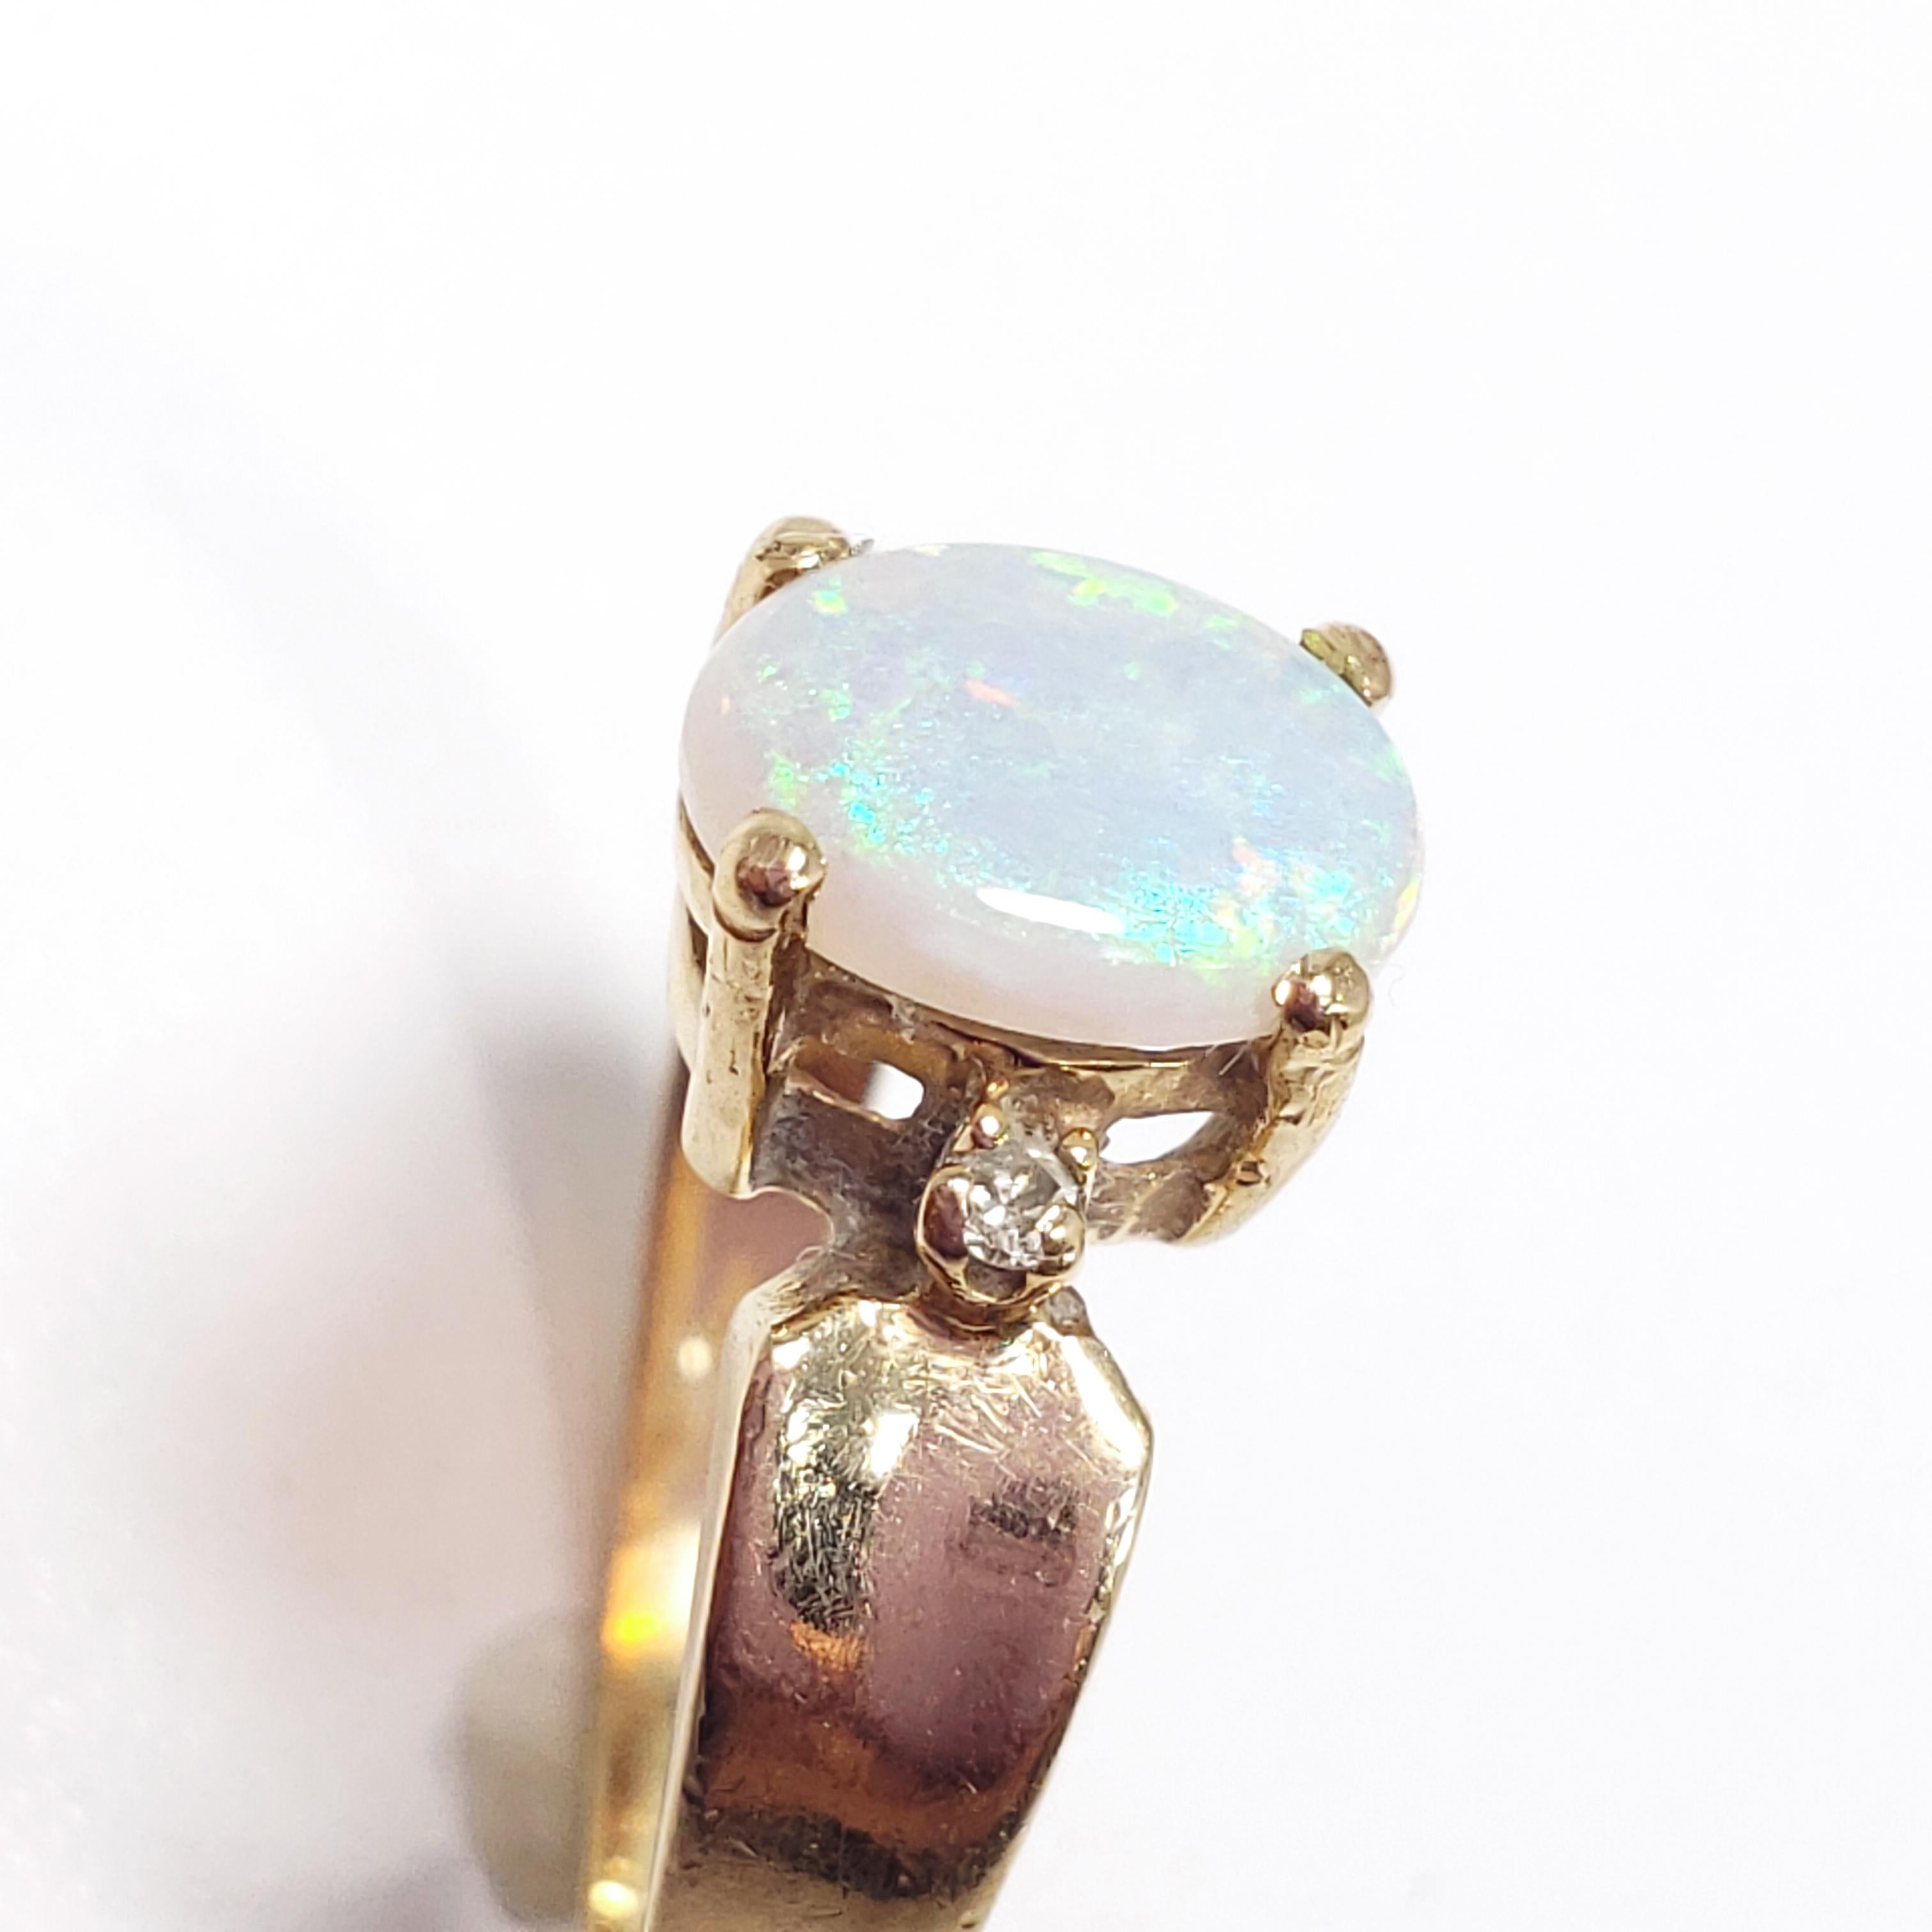 Opal and Diamond 14 Karat Gold Cocktail Statement Fashion Ring, Size US 6 For Sale 1